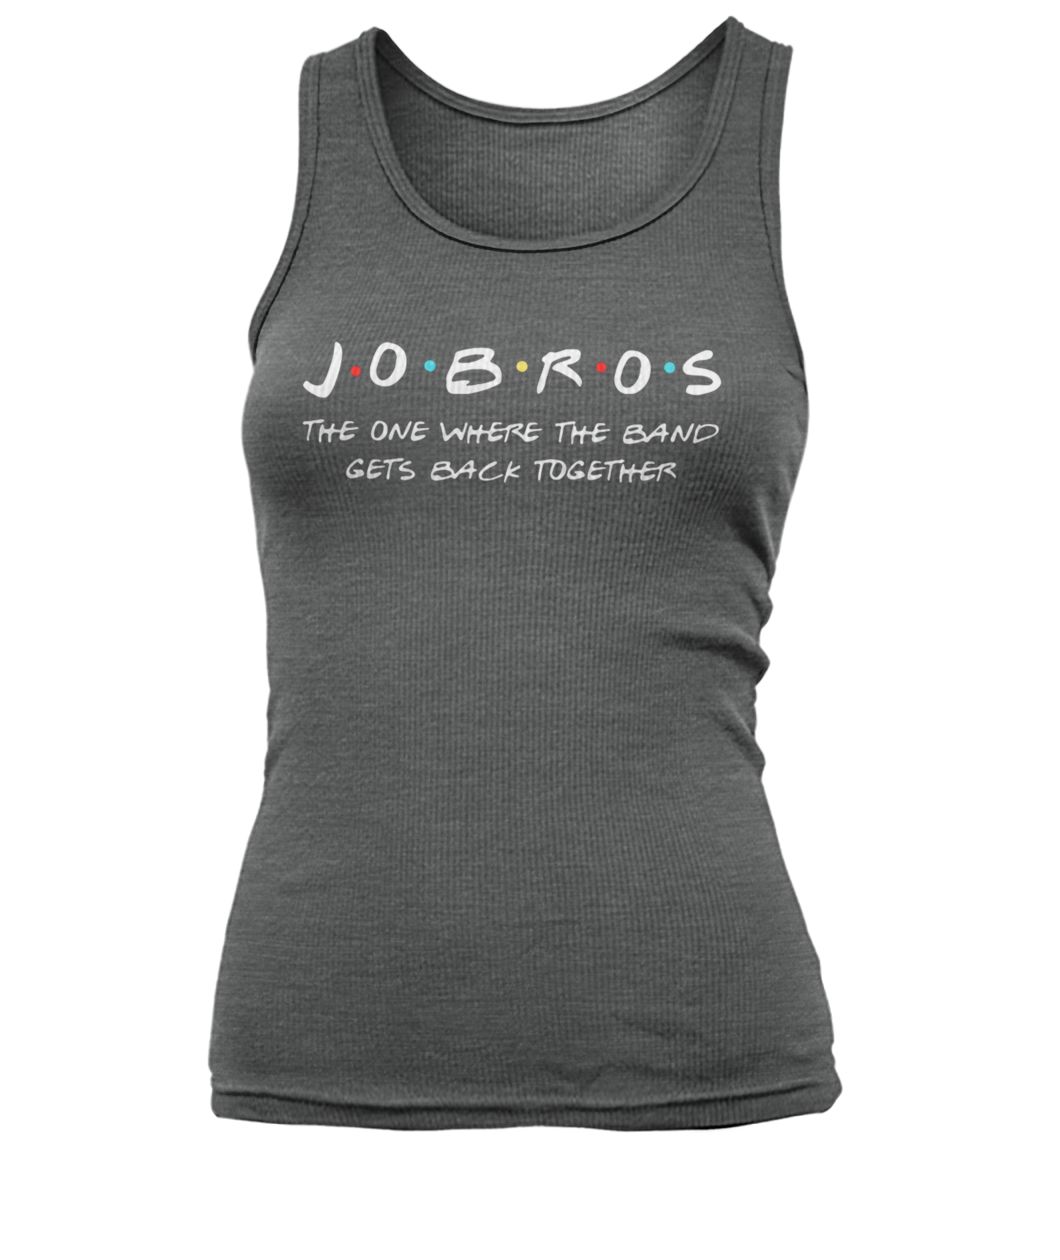 Jobros the one where the band gets back together women's tank top